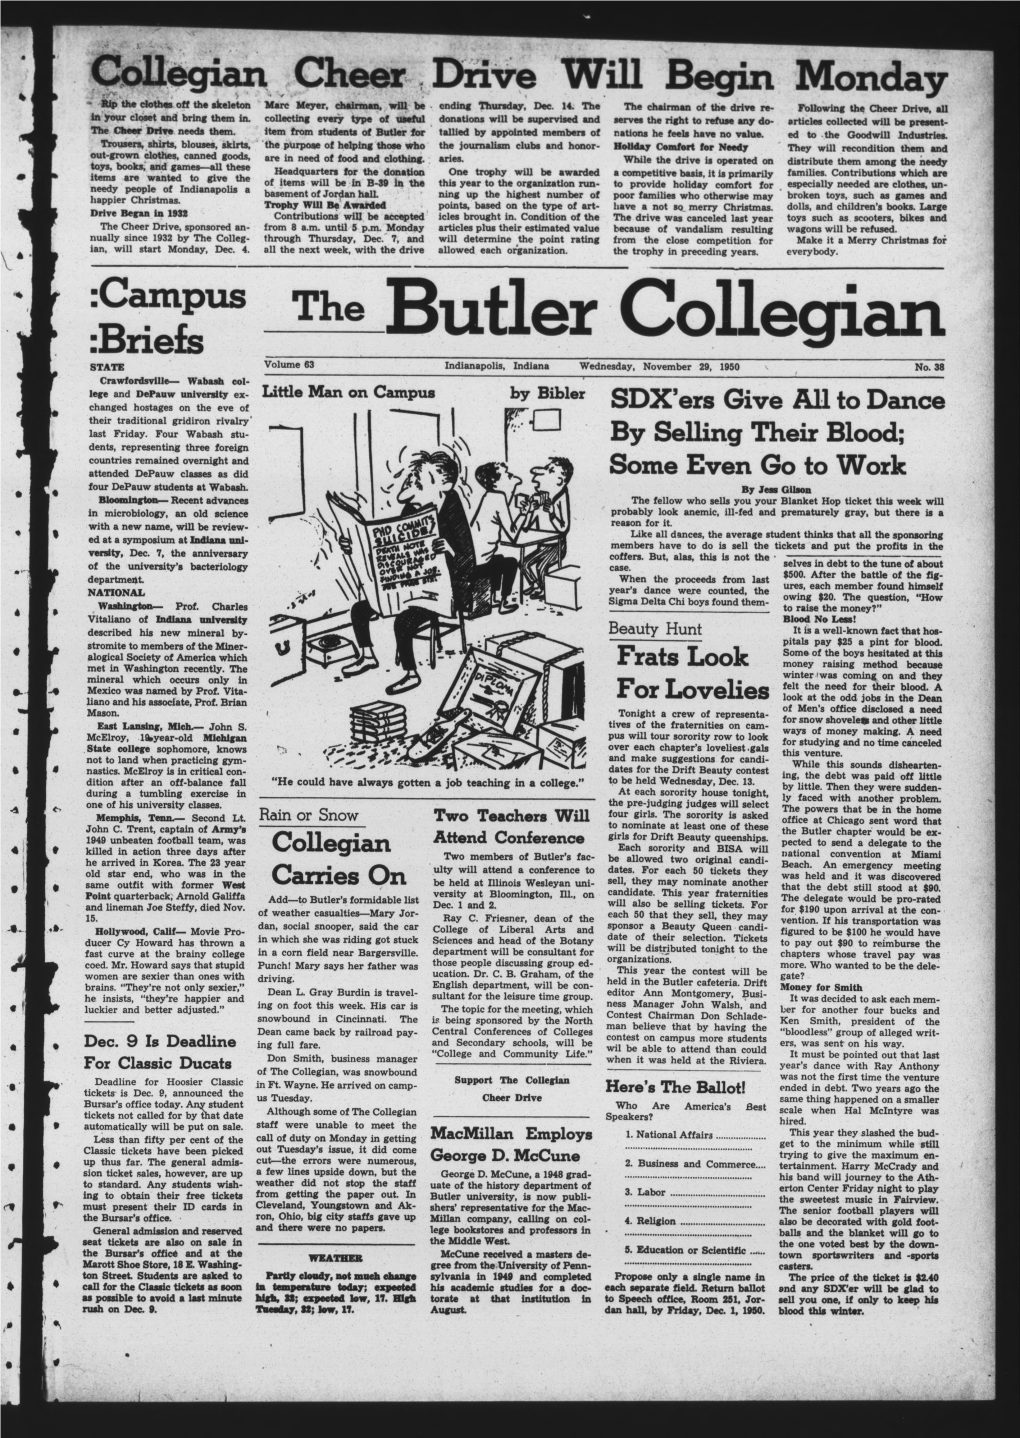 The Butler Collegian STATE Volume 63 Indianapolis, Indiana Wednesday, November 29, 1950 No